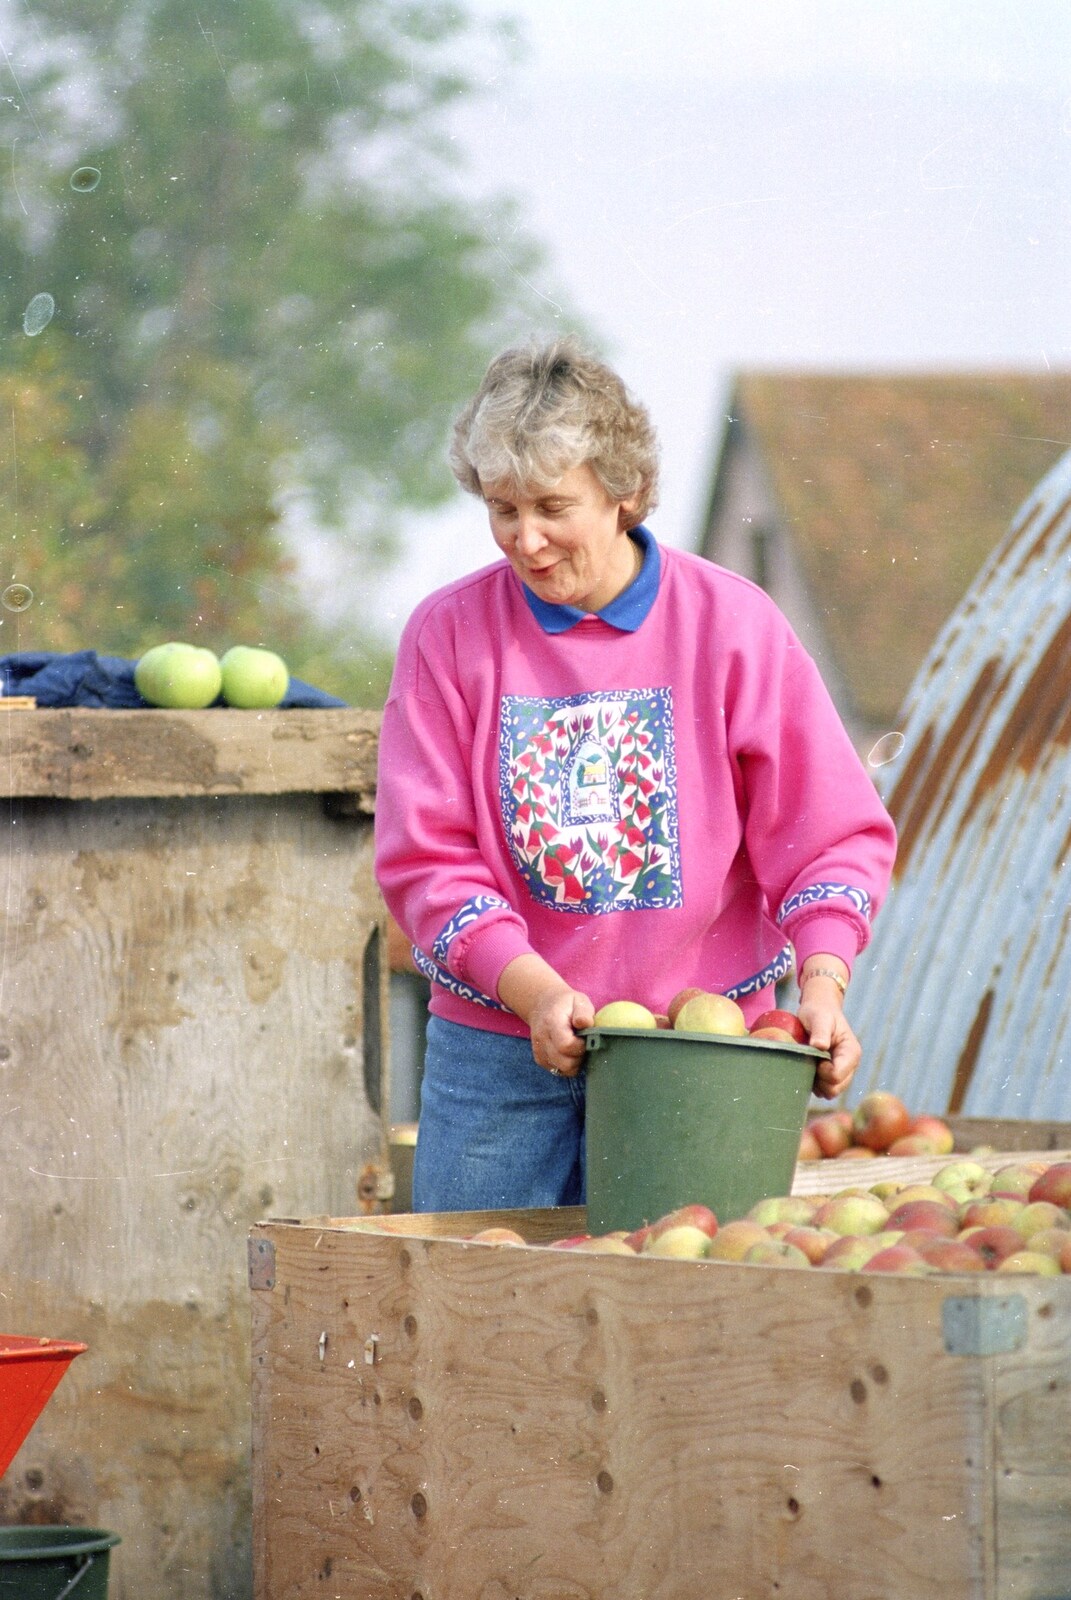 Cider Making (without Rosie), Stuston, Suffolk - 23rd September 1994: Linda with a bucket of apples